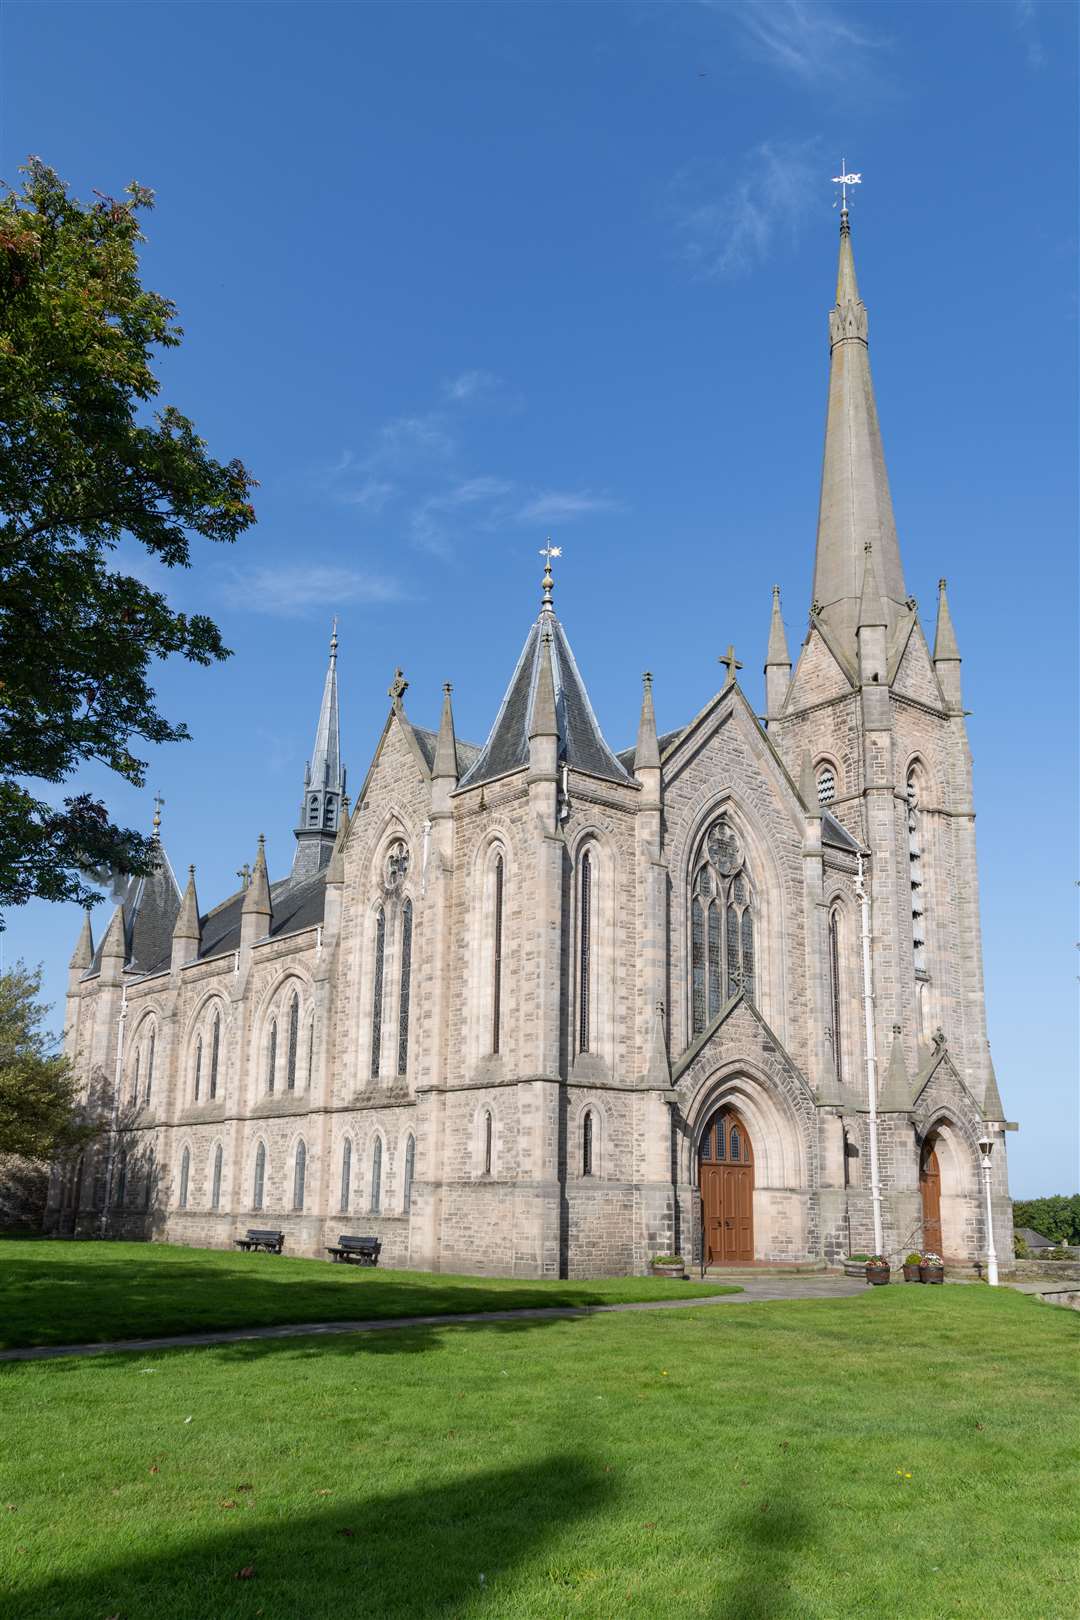 There has been a church on the site since the 1200s when King Alexander III erected a chapel in memory of his late wife Margaret and dedicated it to St Laurence, the patron saint of Forres.